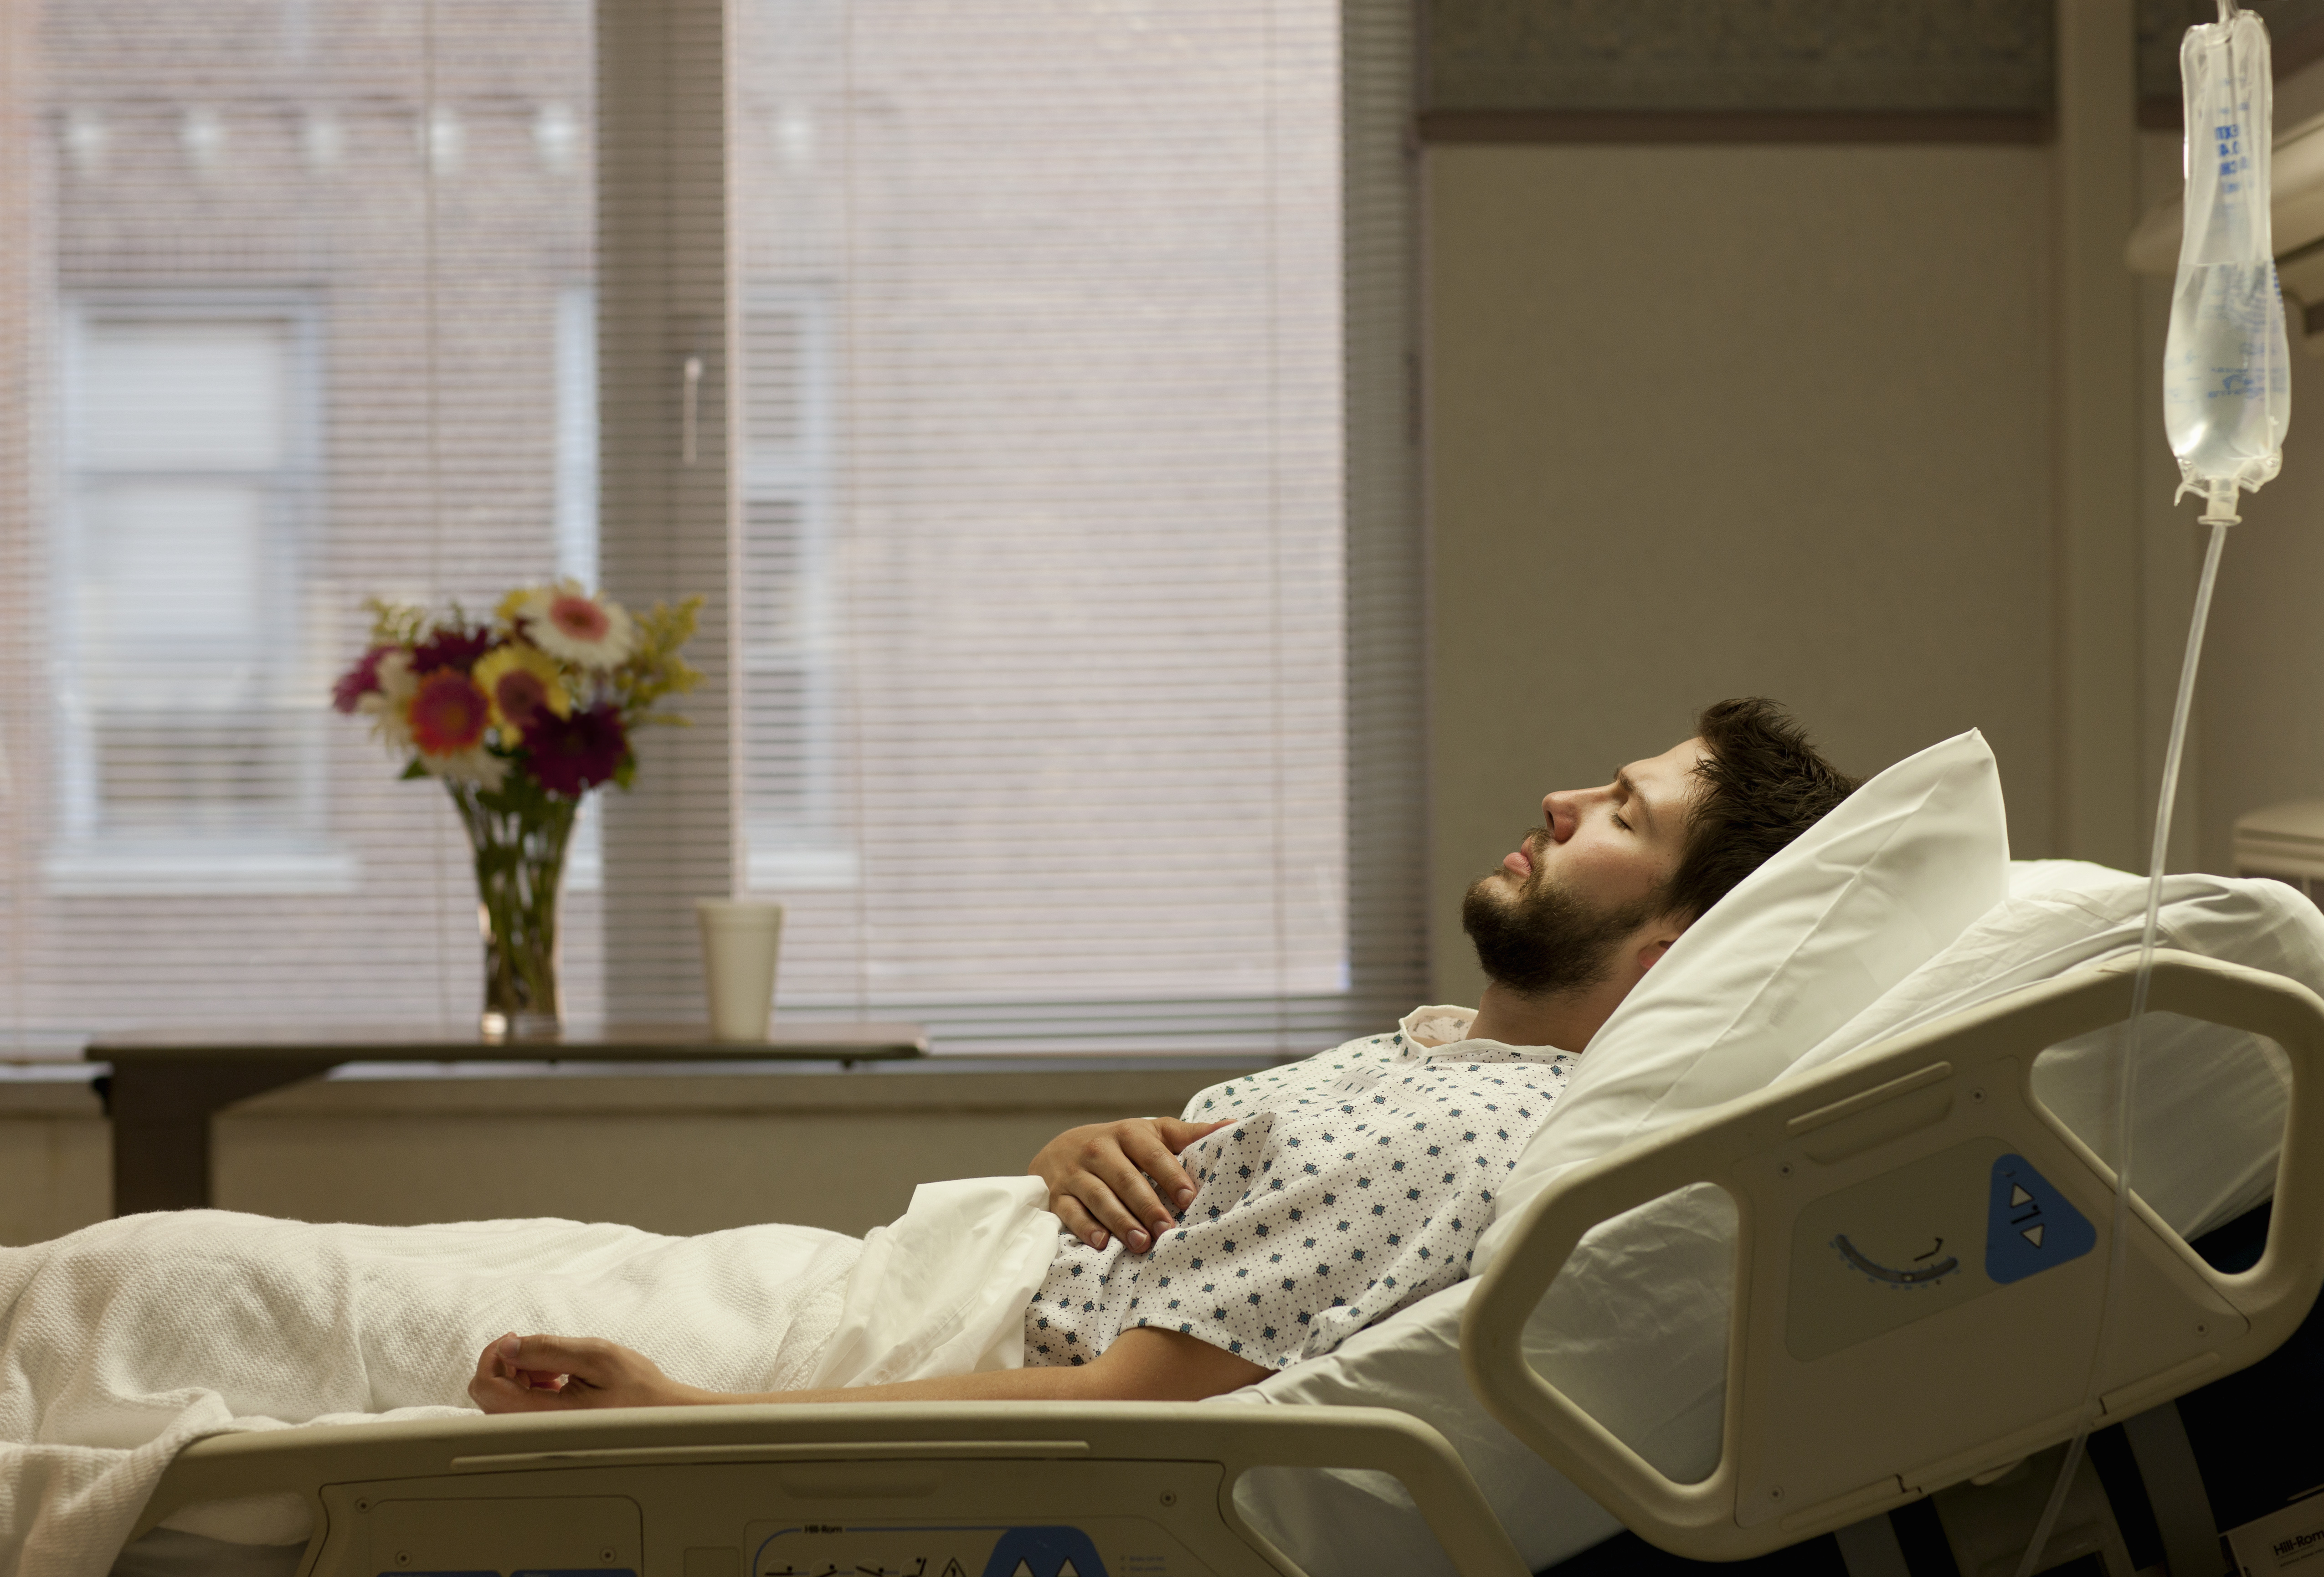 A man lying in a hospital bed | Source: Getty Images